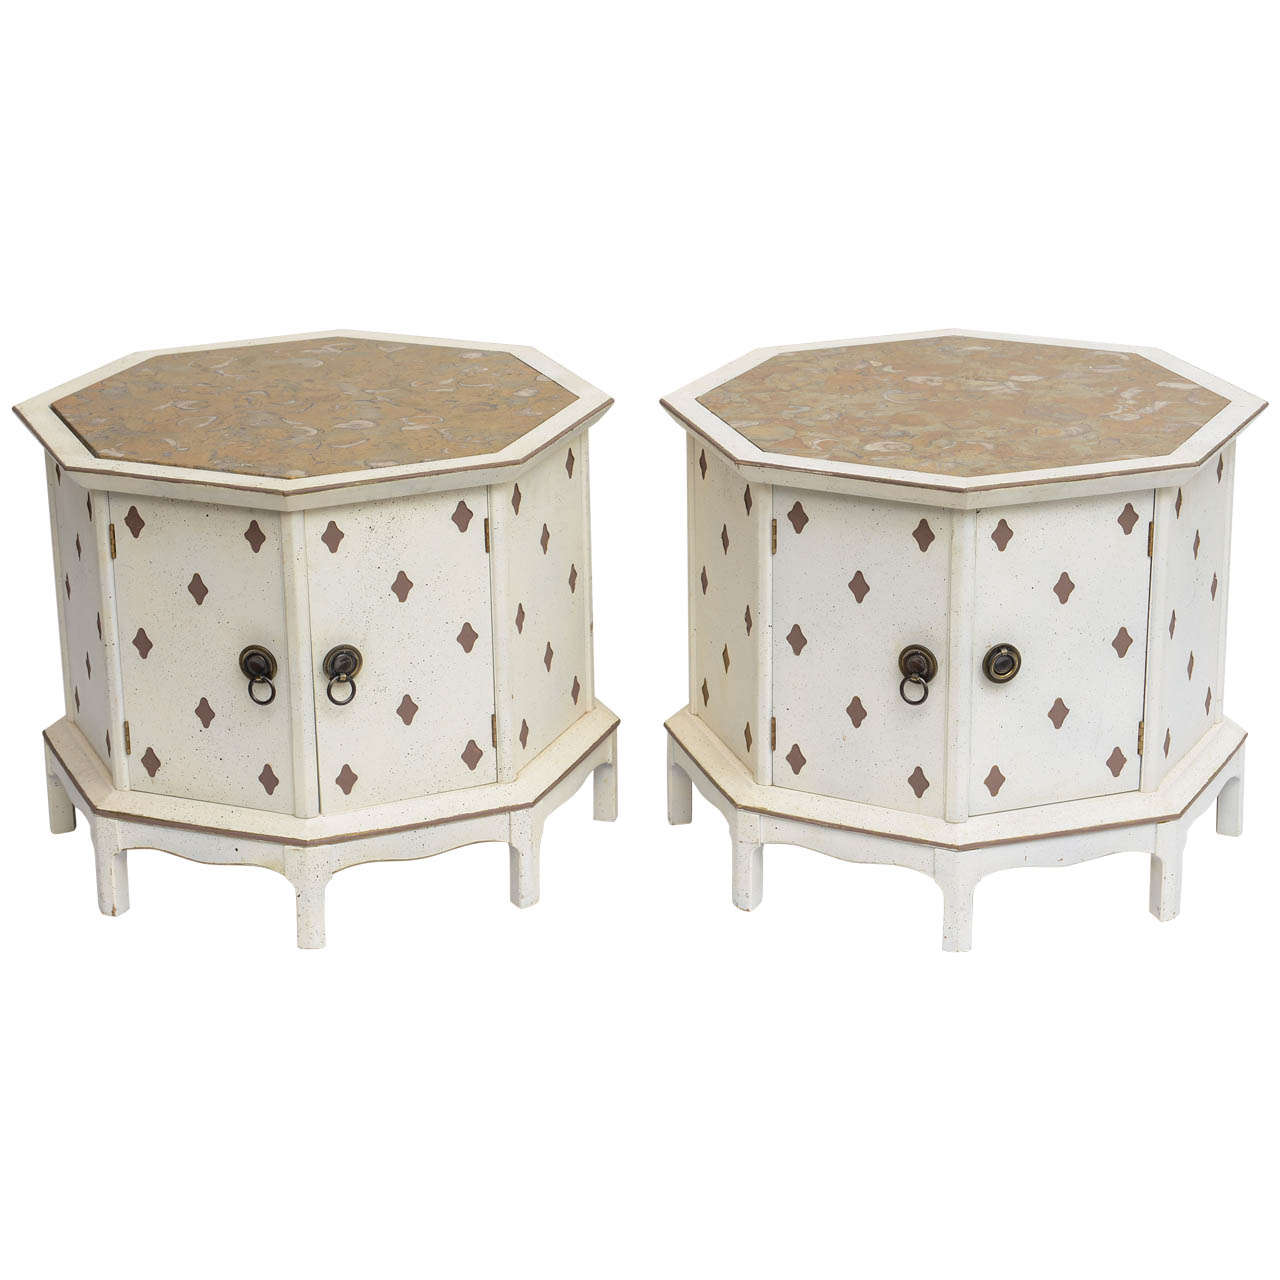 Pair of Marble Topped Hexagonal End Tables For Sale